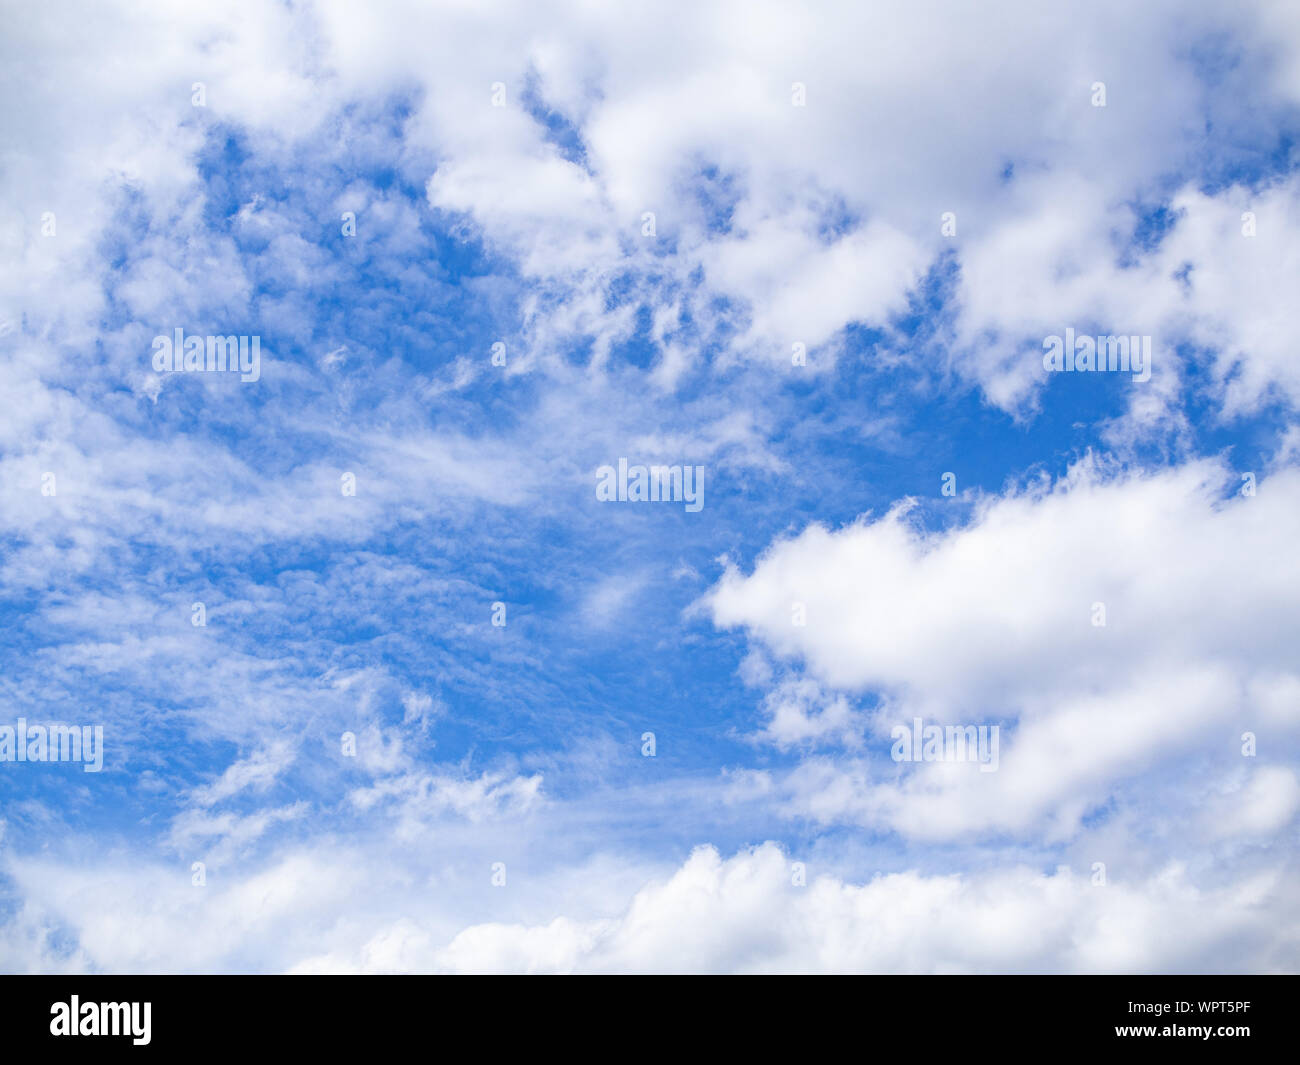 Blue skies shining through white clouds. Background. Stock Photo